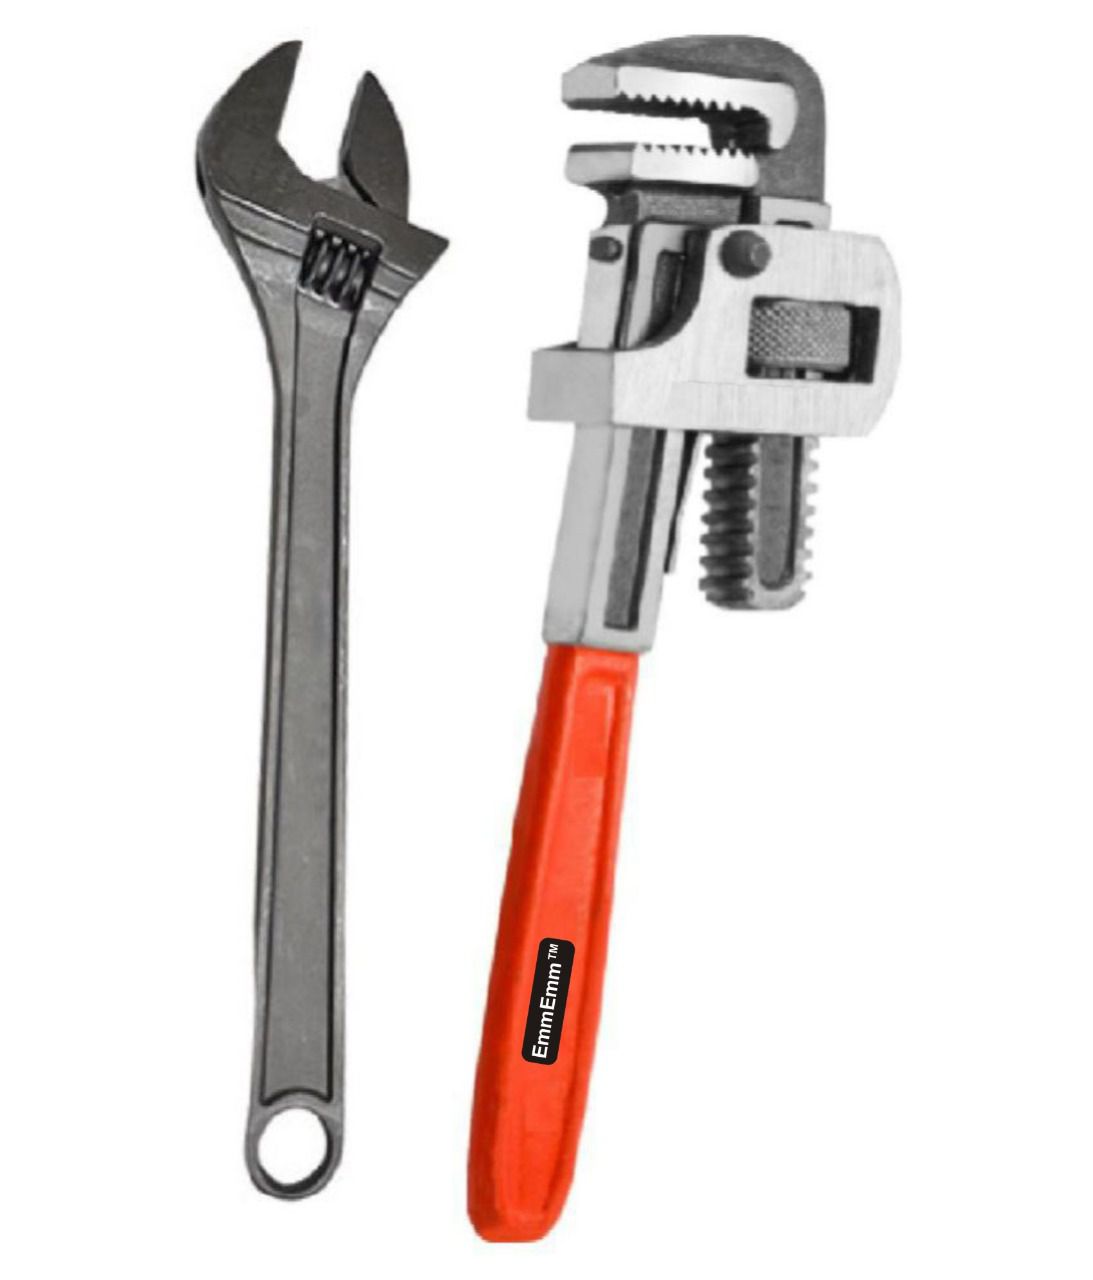 EmmEmm - tools hardware Premium 10 Inch Pipe Wrench/Socket Wrench & 8 Inch Adjustable Wrench